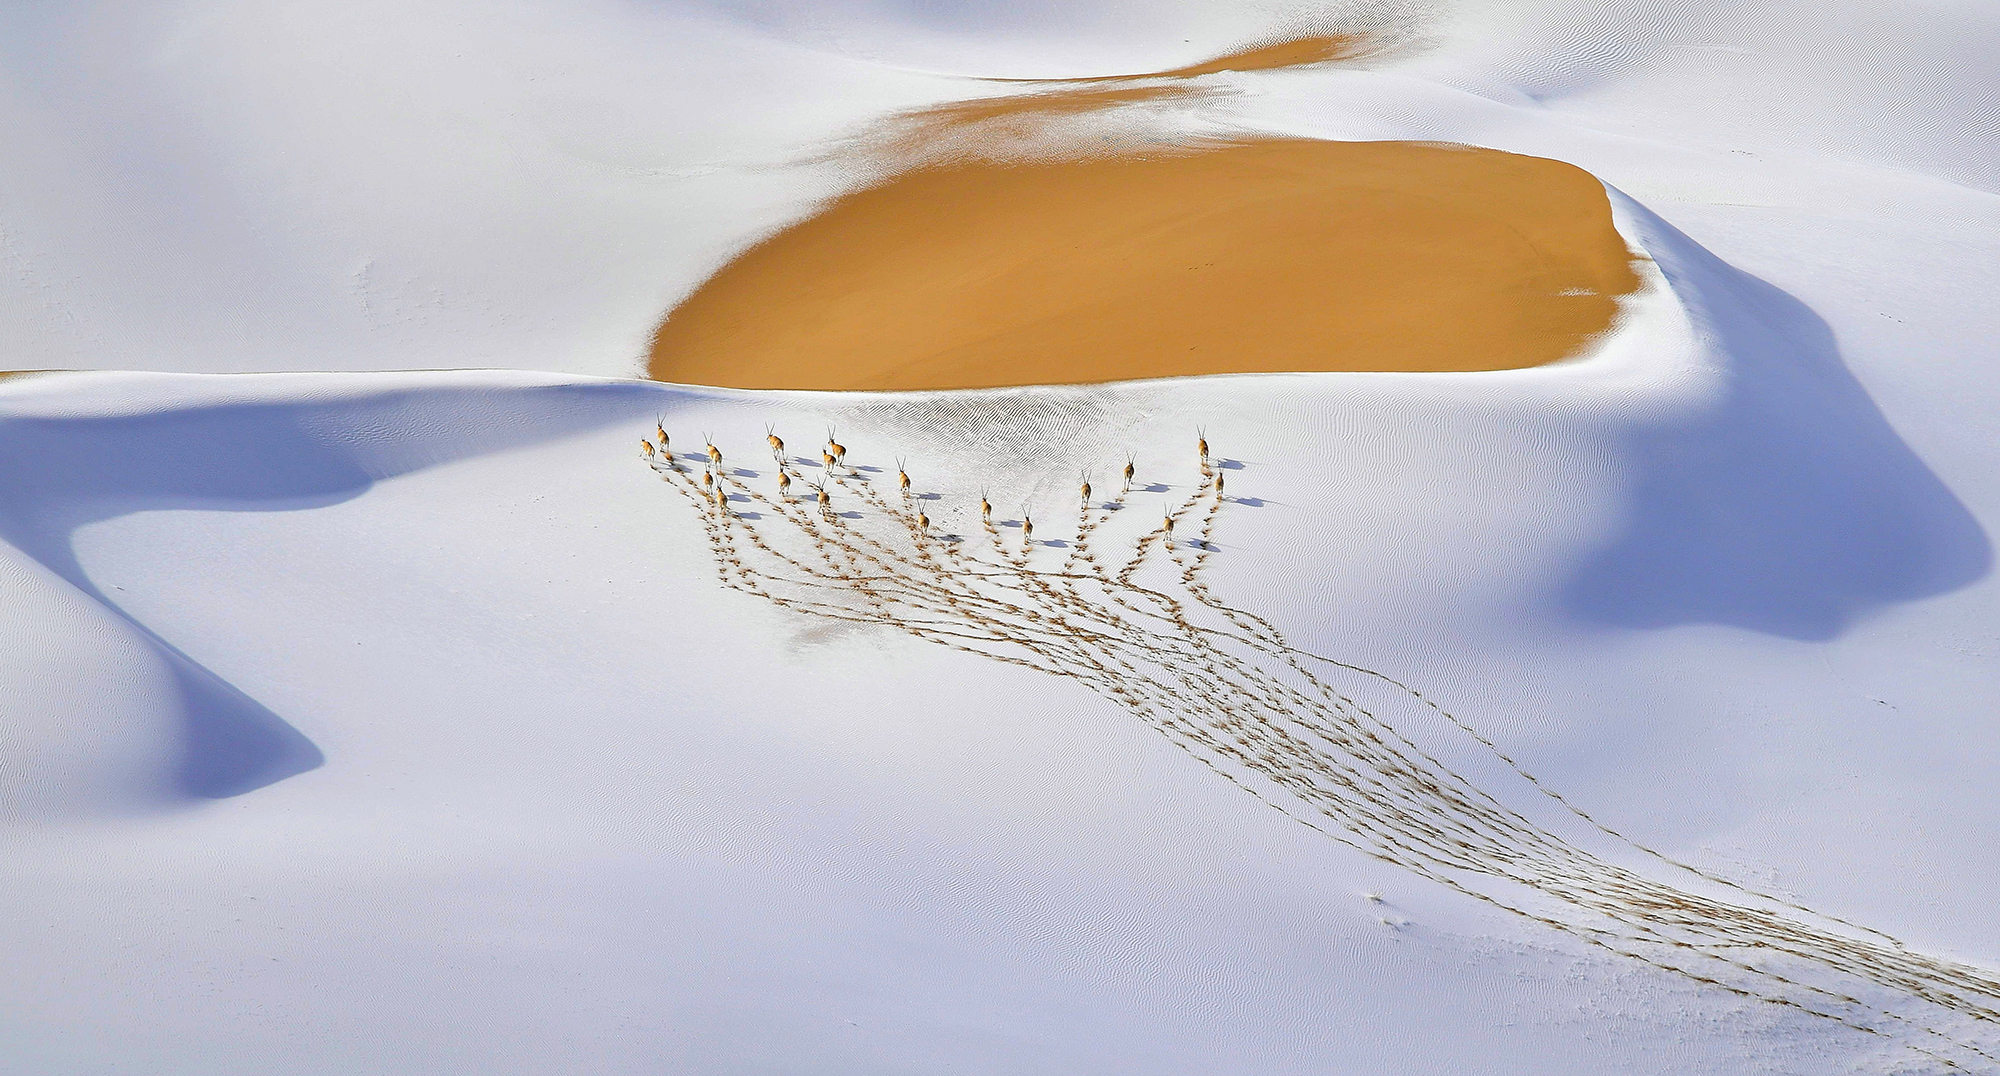 A small herd of male chiru leaves a trail of footprints on a snow-veiled slope in the Kumukuli desert of China’s Altun Shan National Nature Reserve